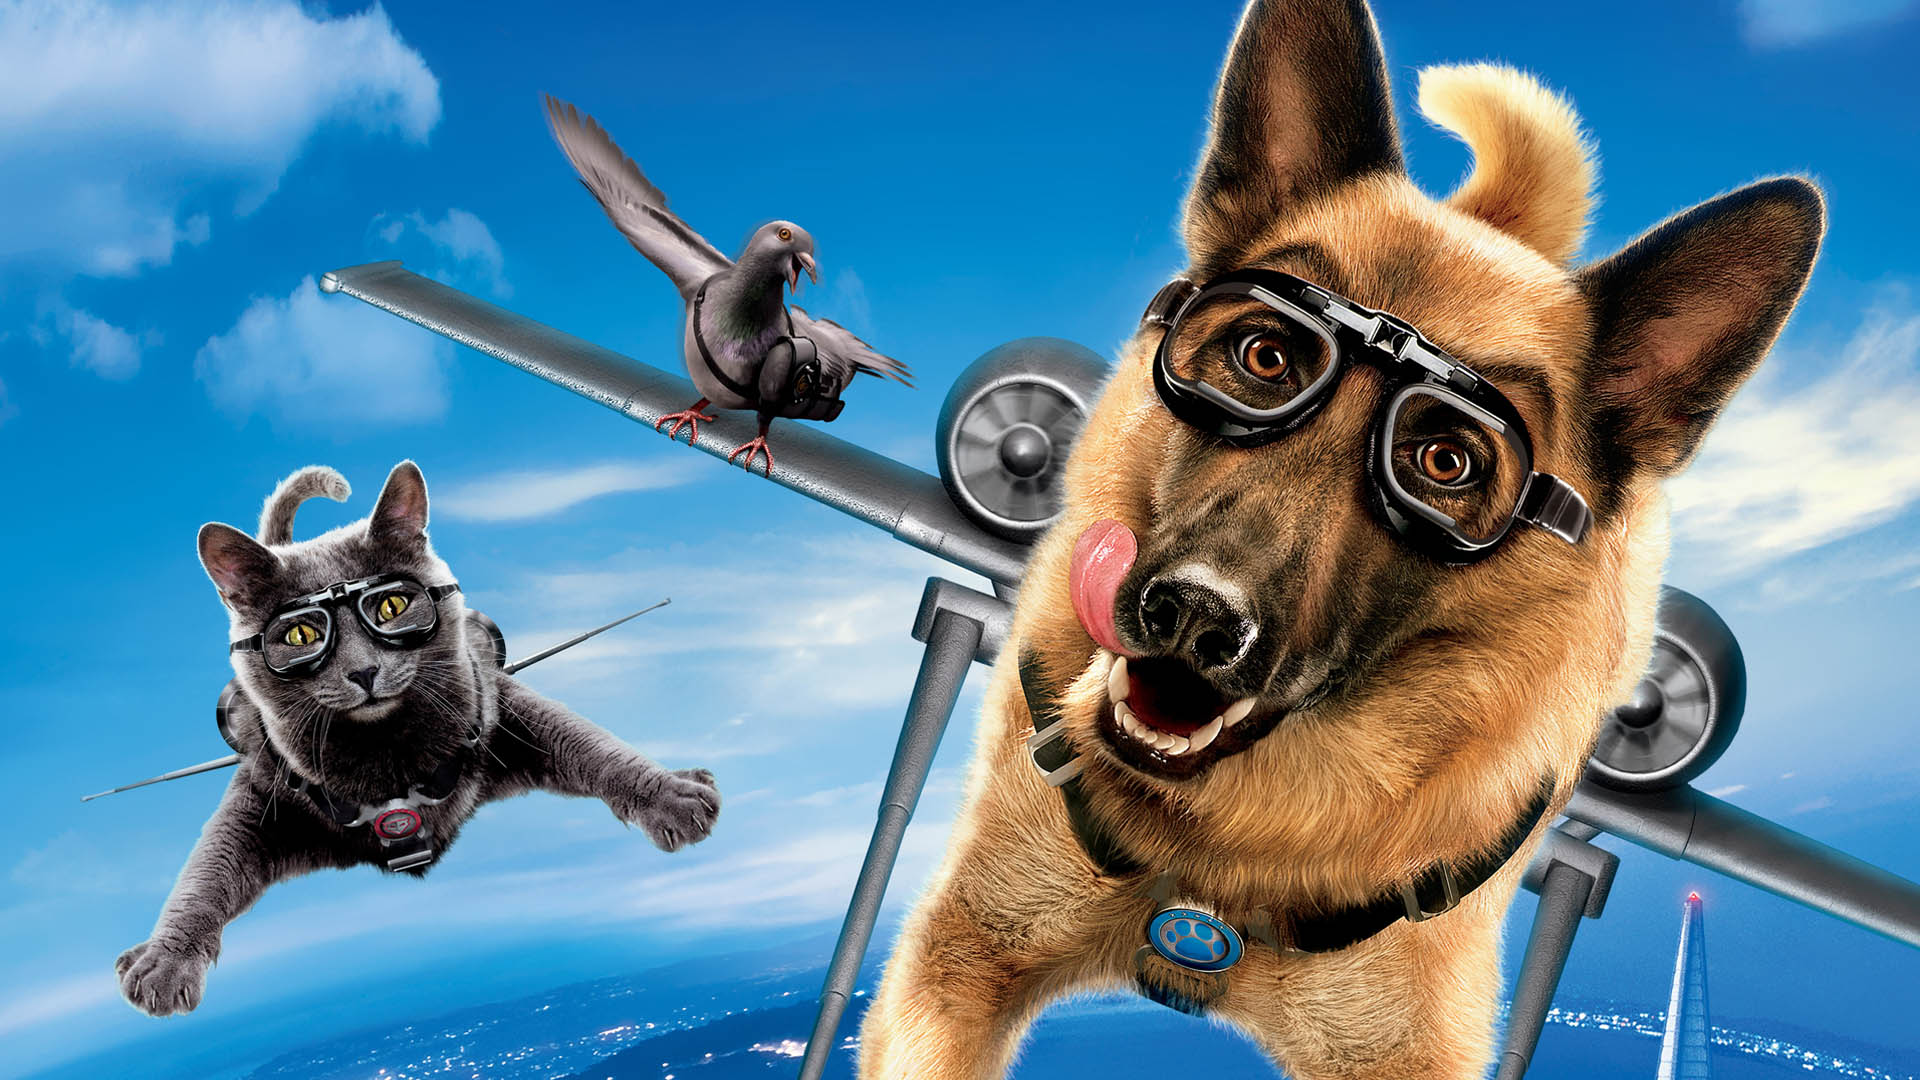 movie, cats & dogs: the revenge of kitty galore